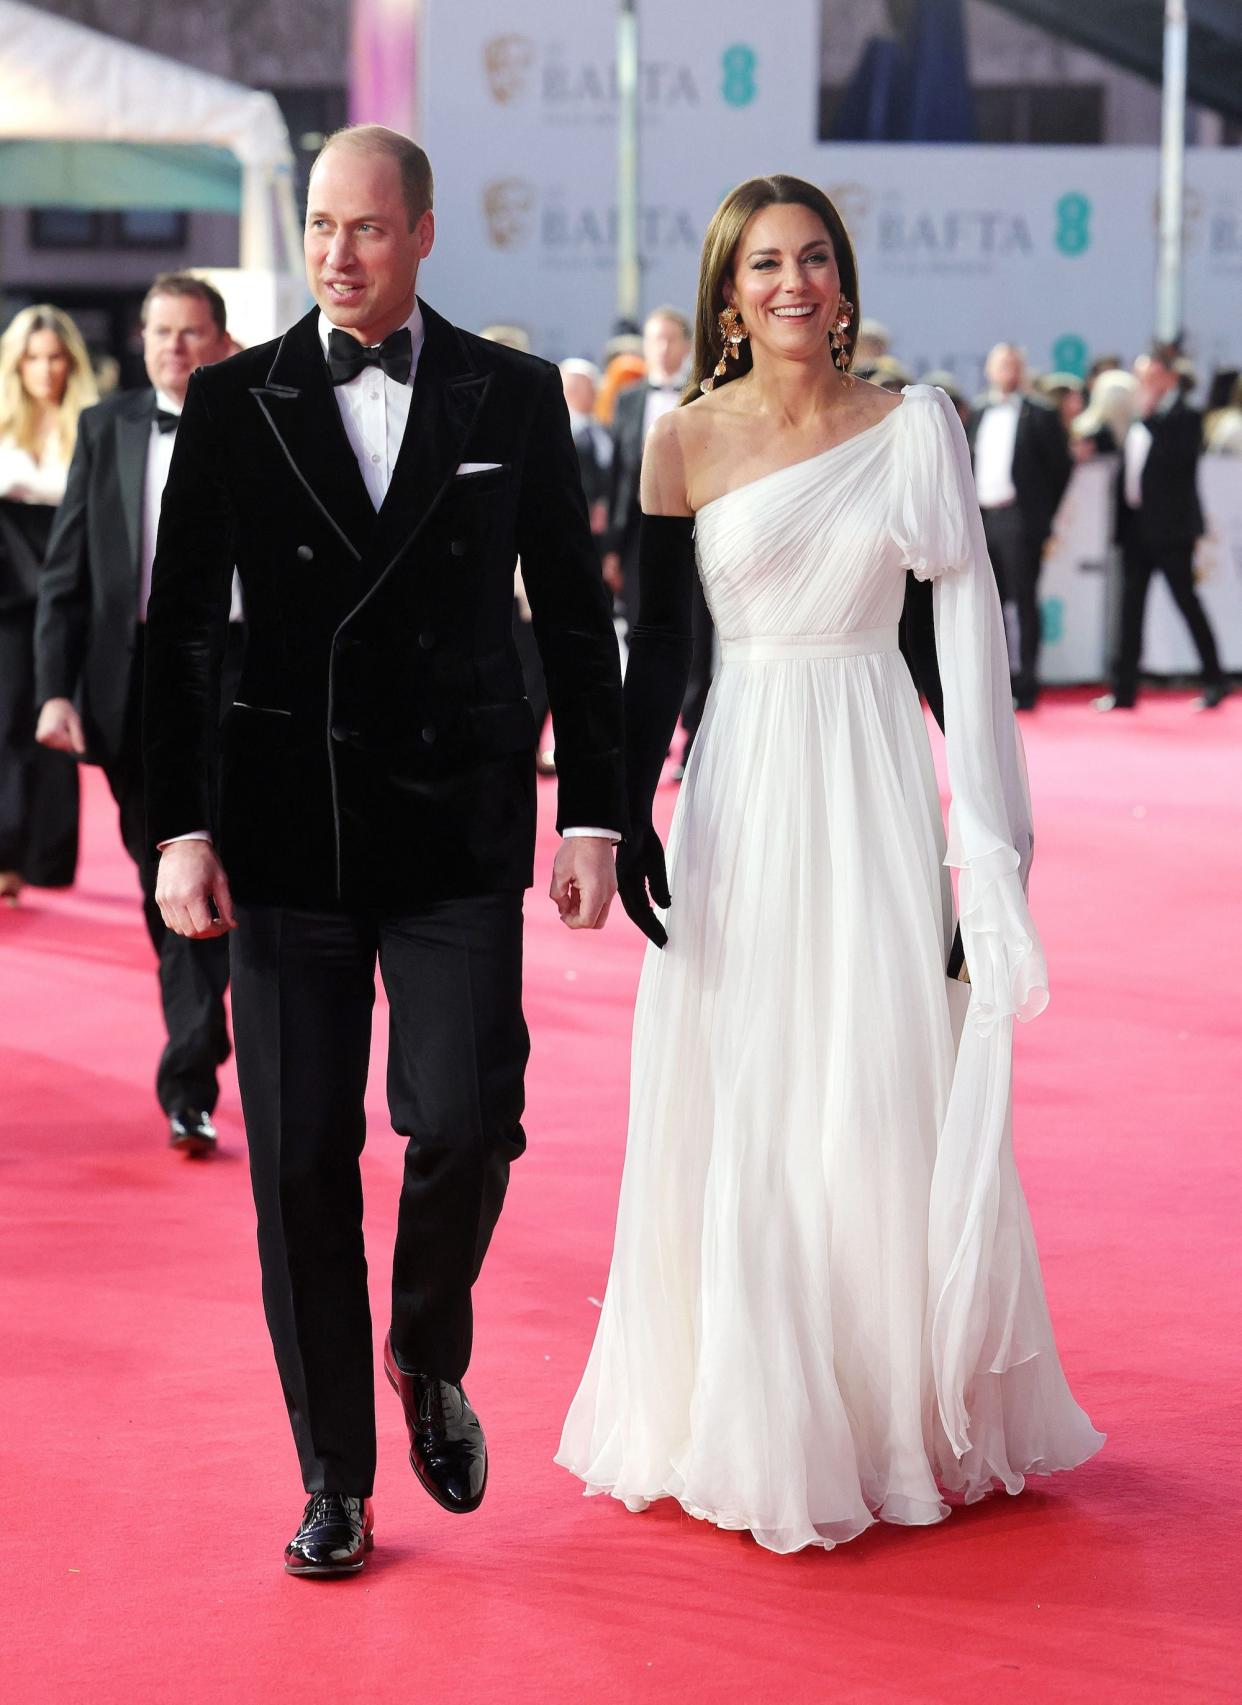 Prince William and Kate Middleton attend the BAFTA Awards in February 2023.